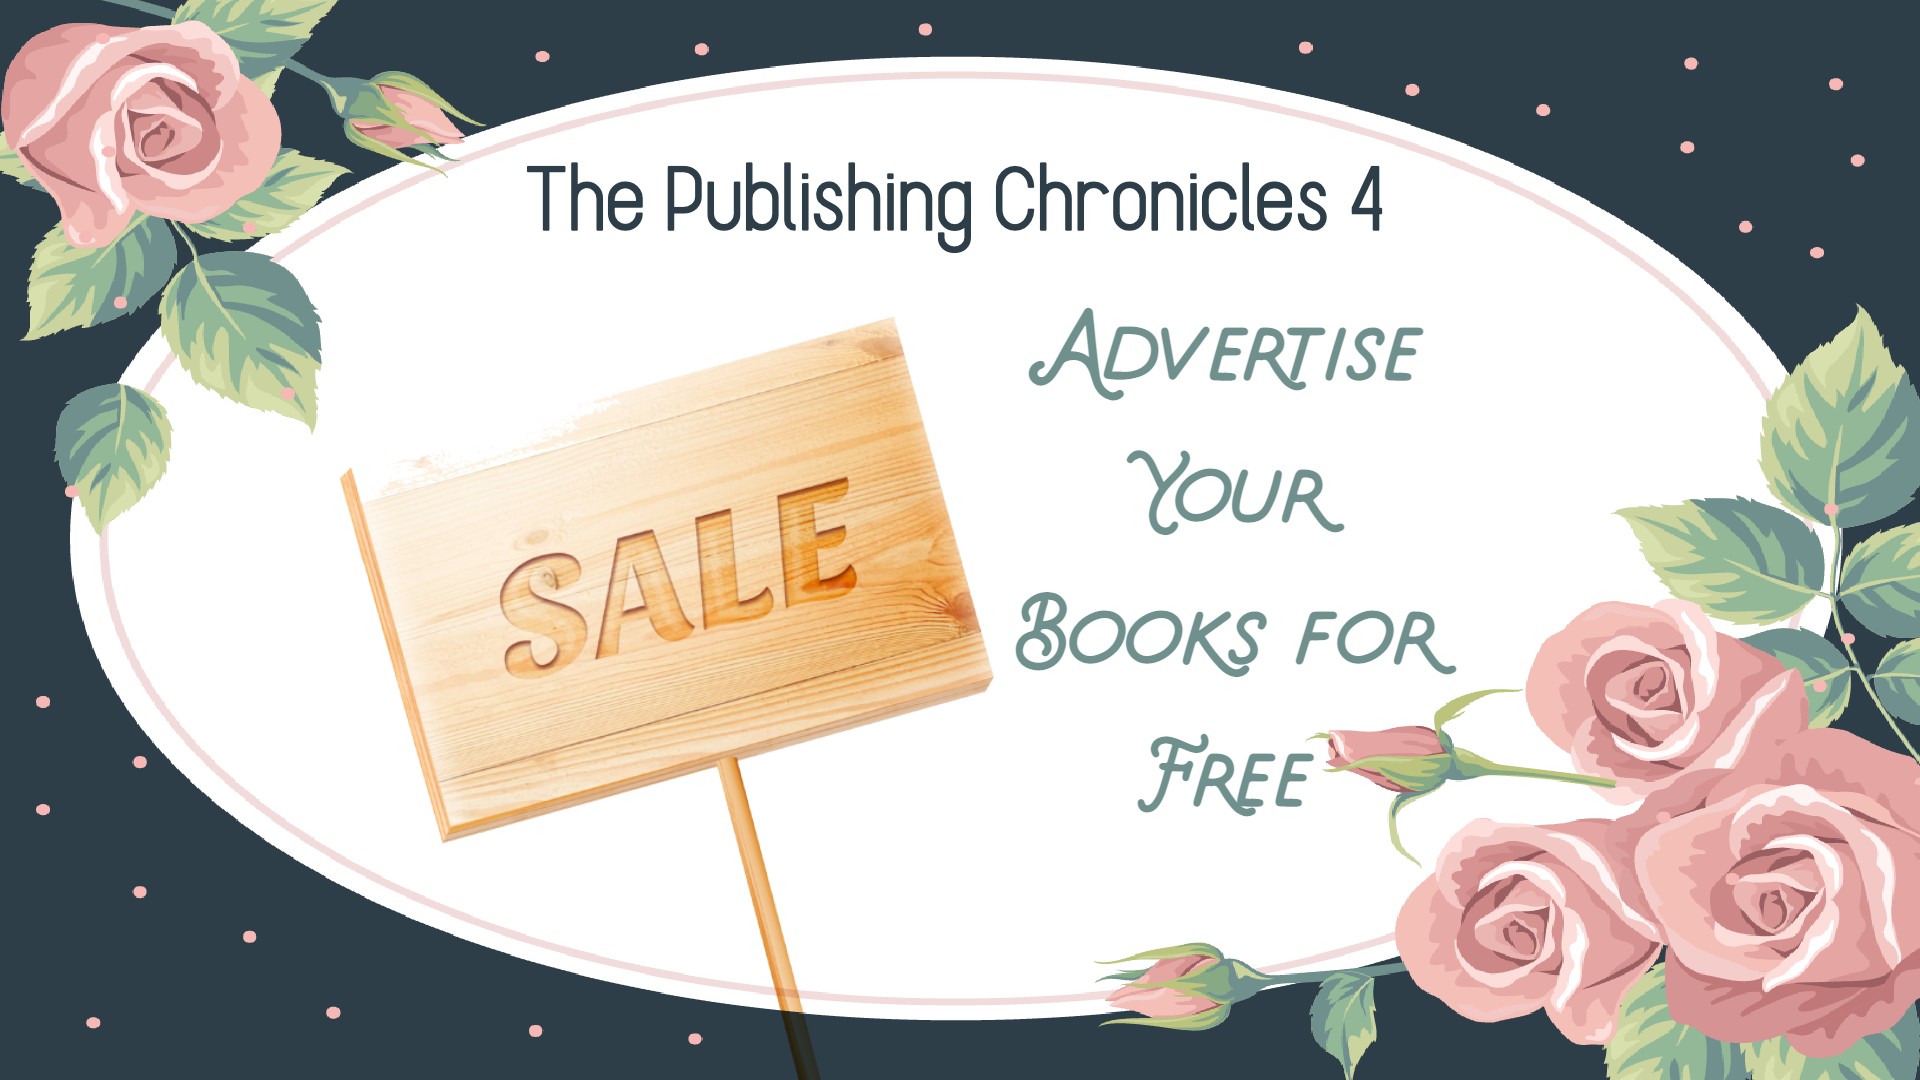 The Publishing Chronicles 4: Advertise Your Books for Free